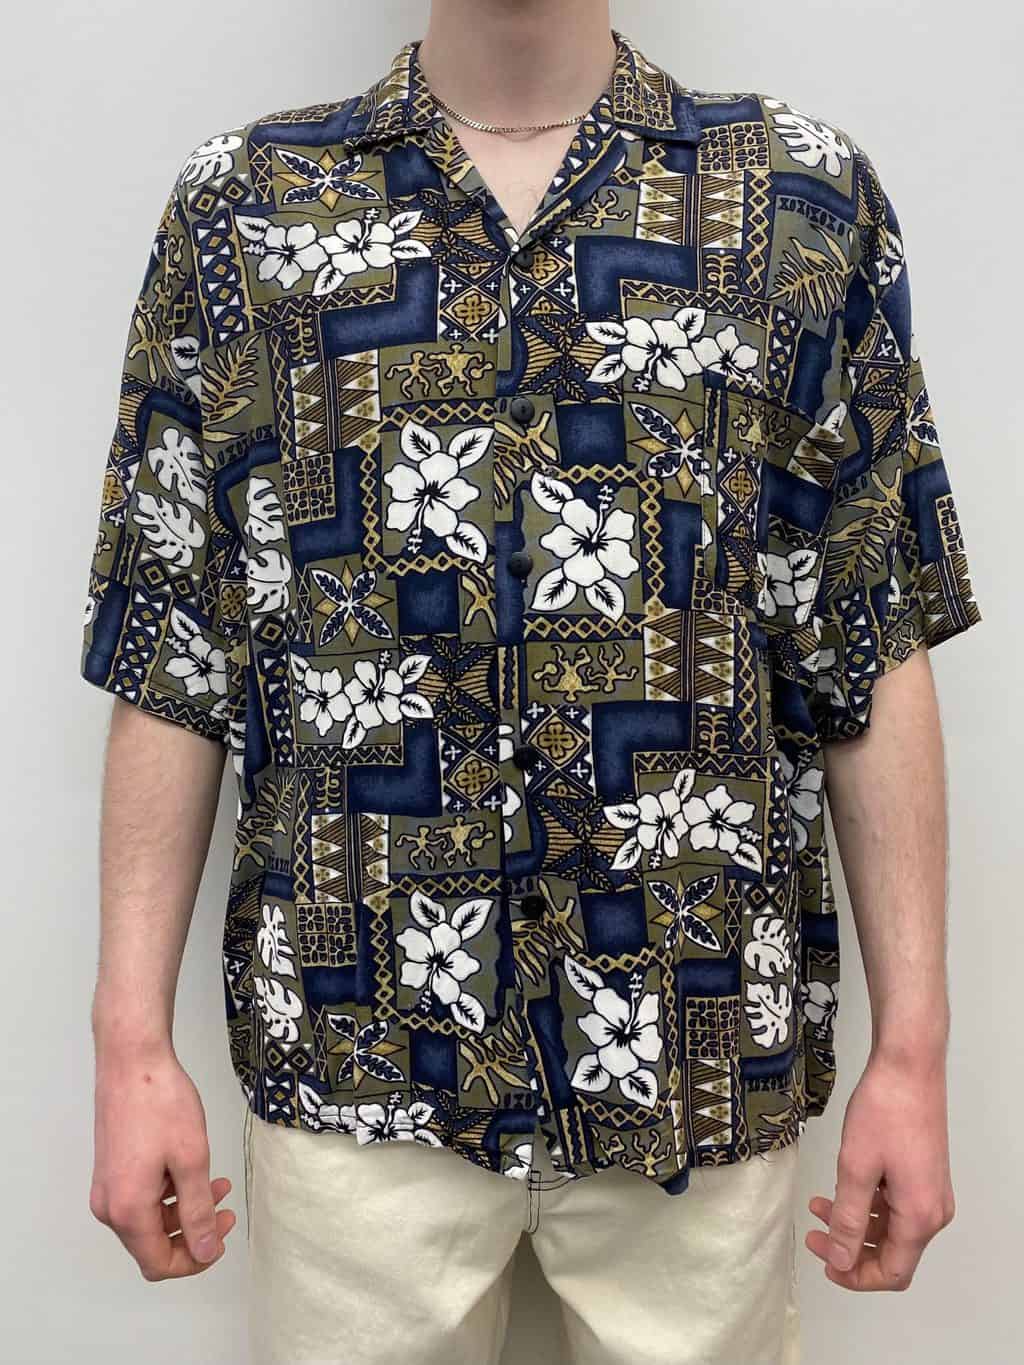 Unisex Tropical Hibiscus Print Casual Top Size Large to 1X Men's Shirt 90's Vintage Black White and Brown Hawaiian Shirt